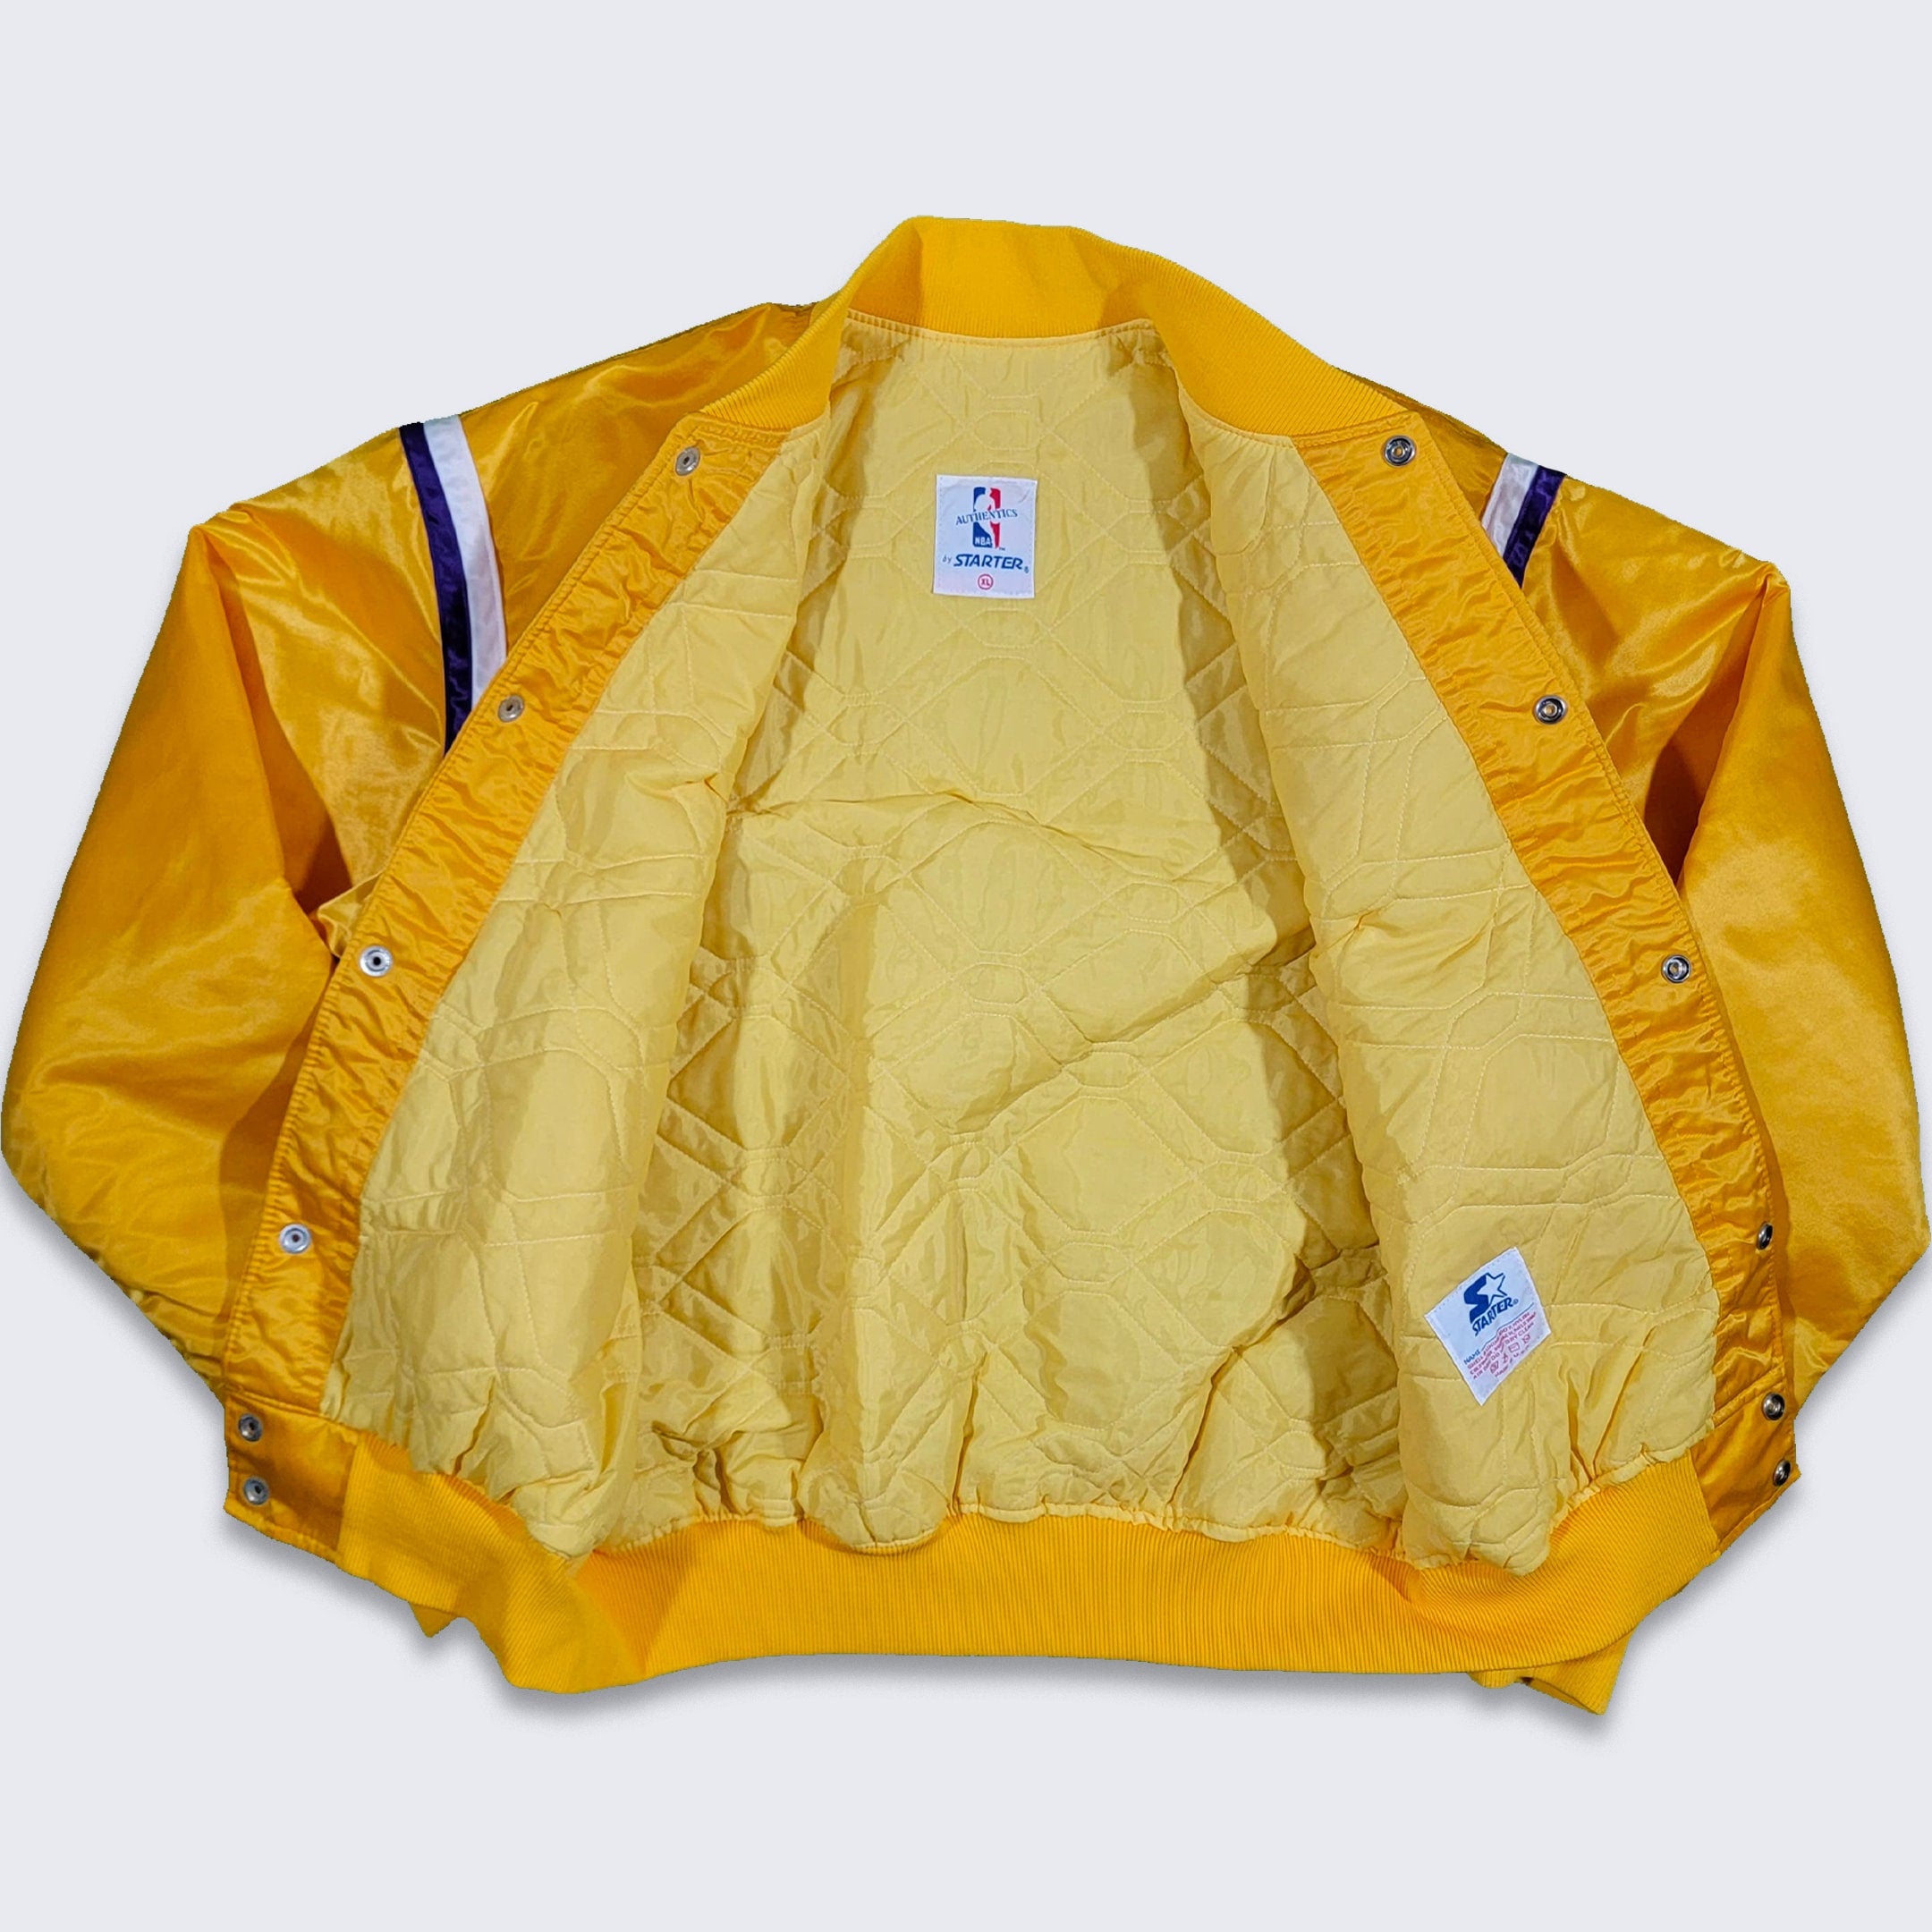 Reclaimed Vintage inspired cotton jersey bomber jacket in yellow - YELLOW